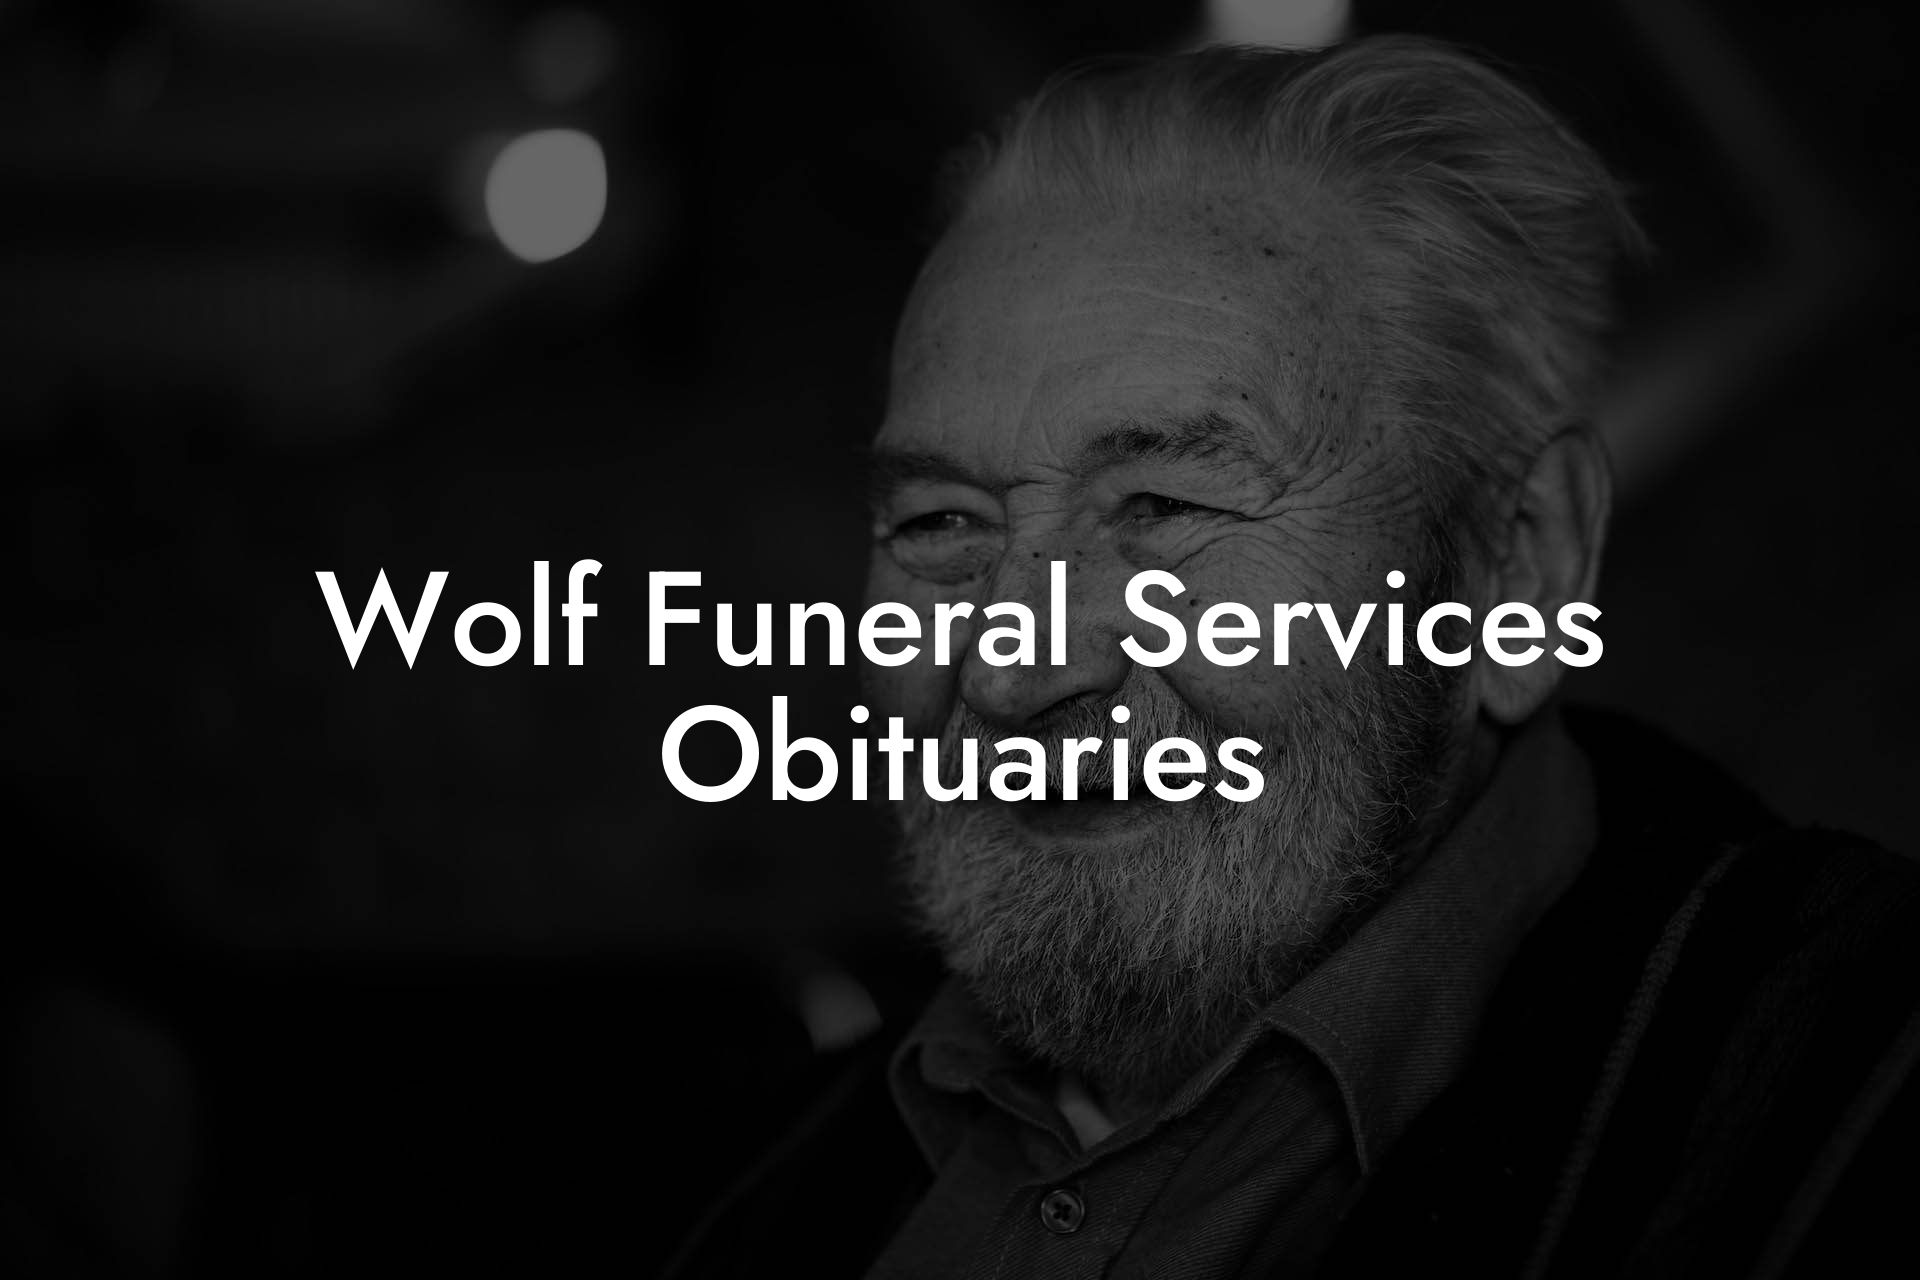 Wolf Funeral Services Obituaries